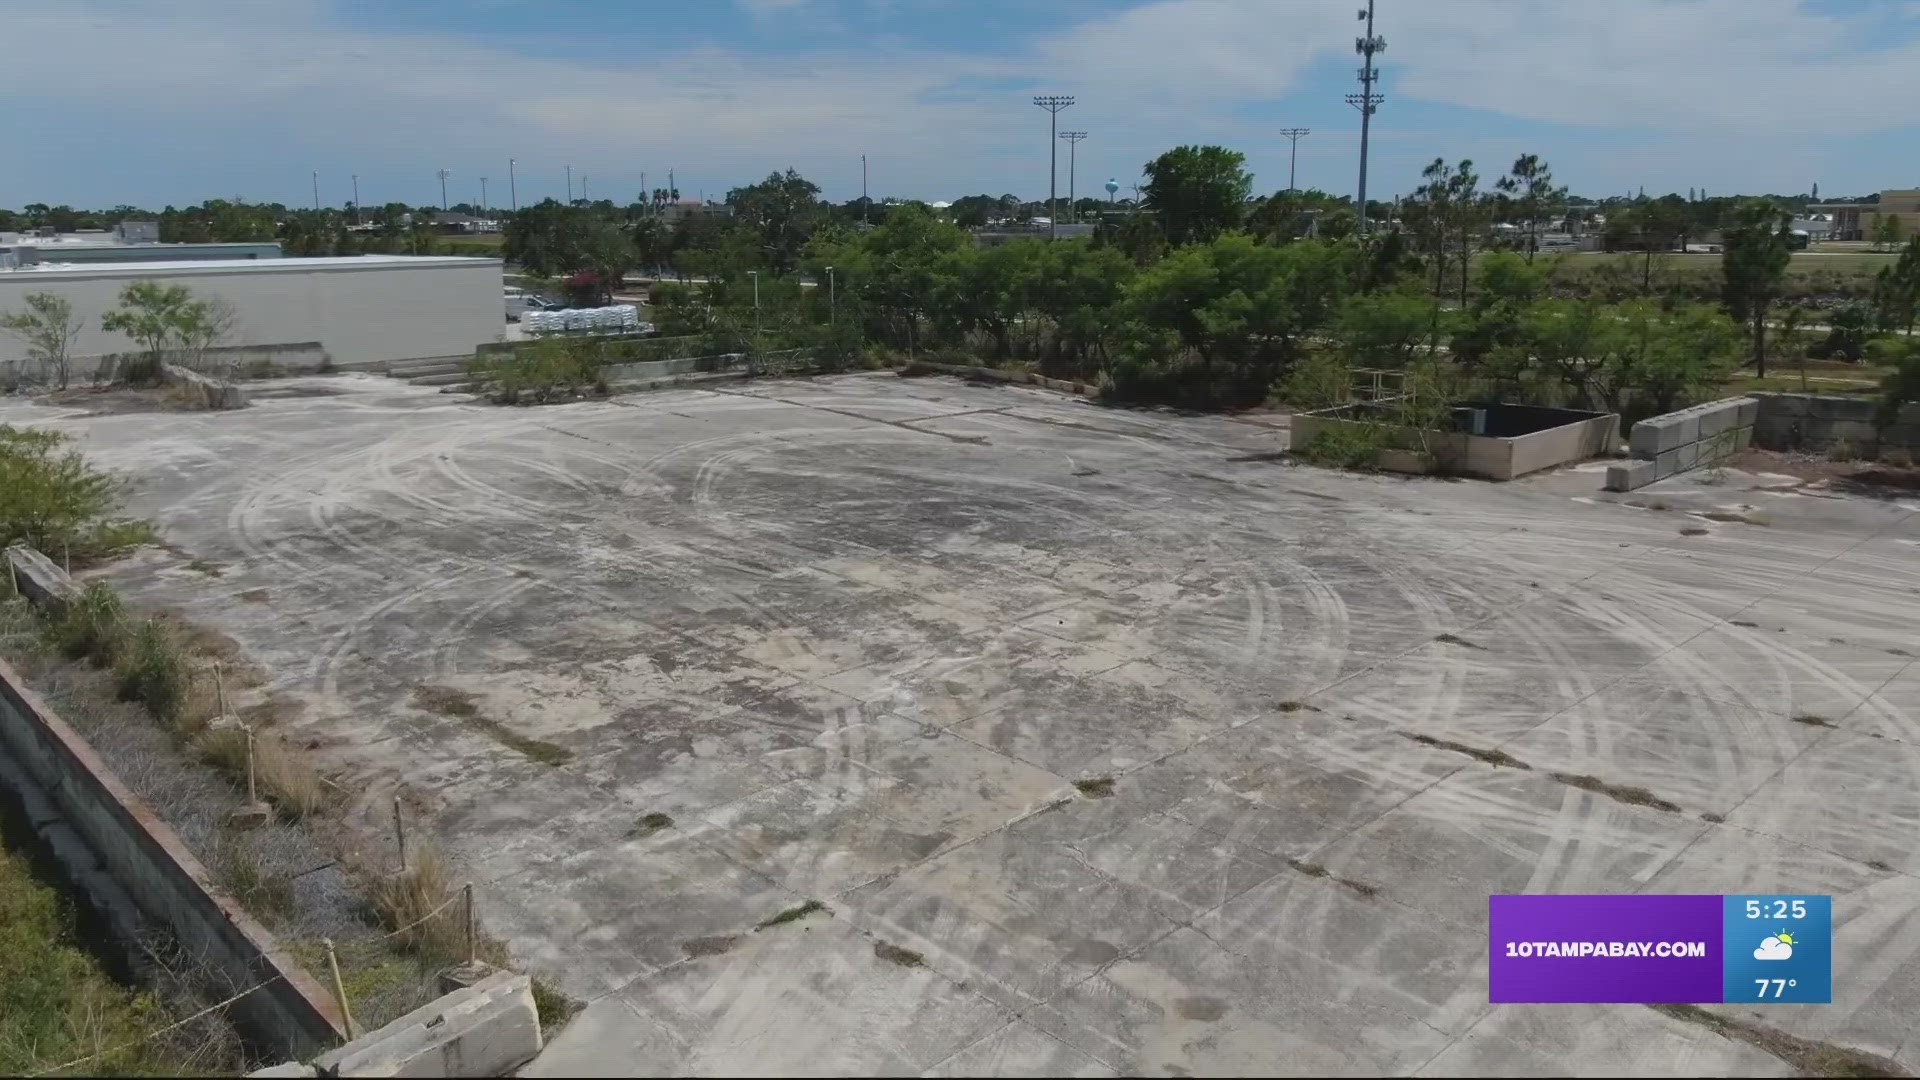 The city is planning to turn a former cement plant into a city park.